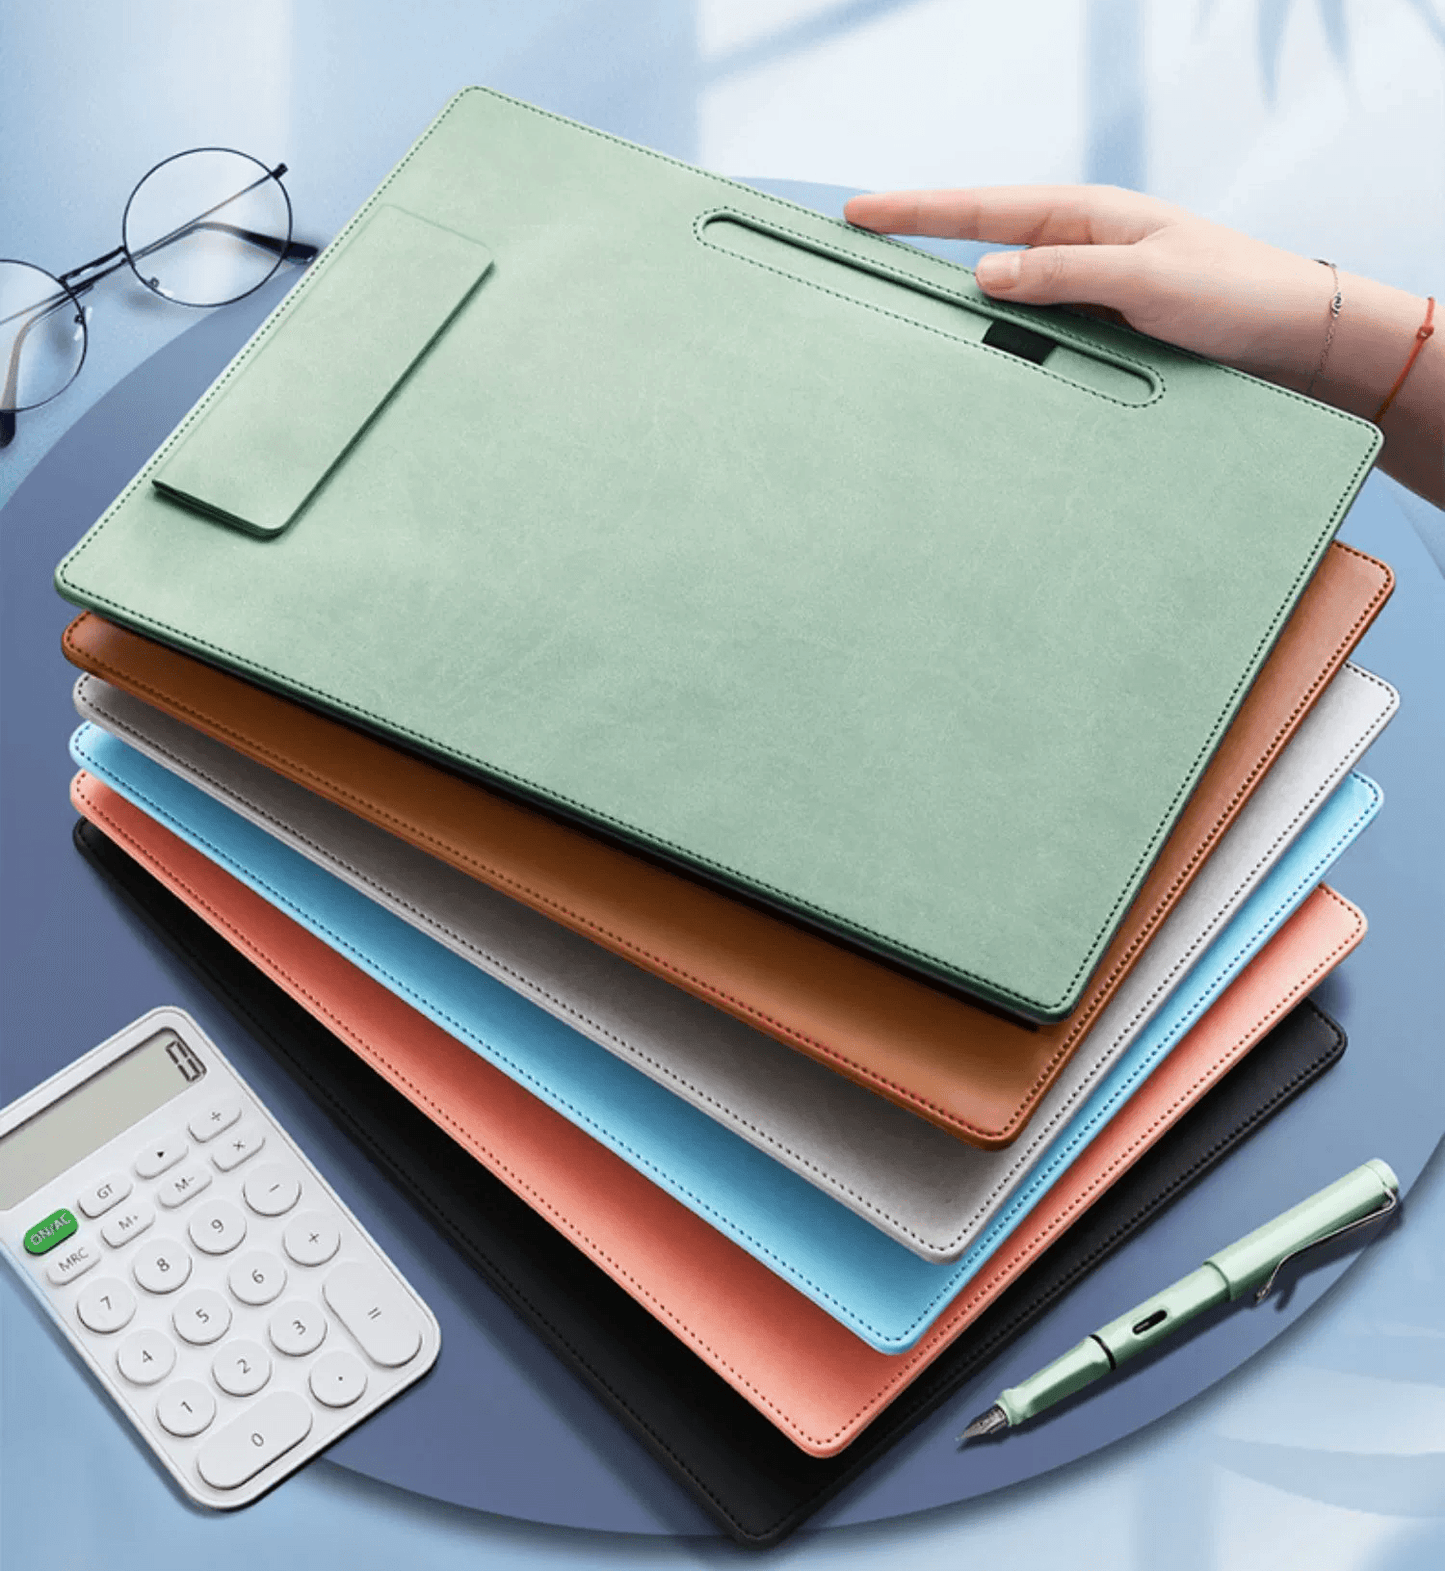 Custom A4 Vegan Leather Folder Clipboard for Office | Memo Clipboard | Meeting Clipboard with Pen Holder